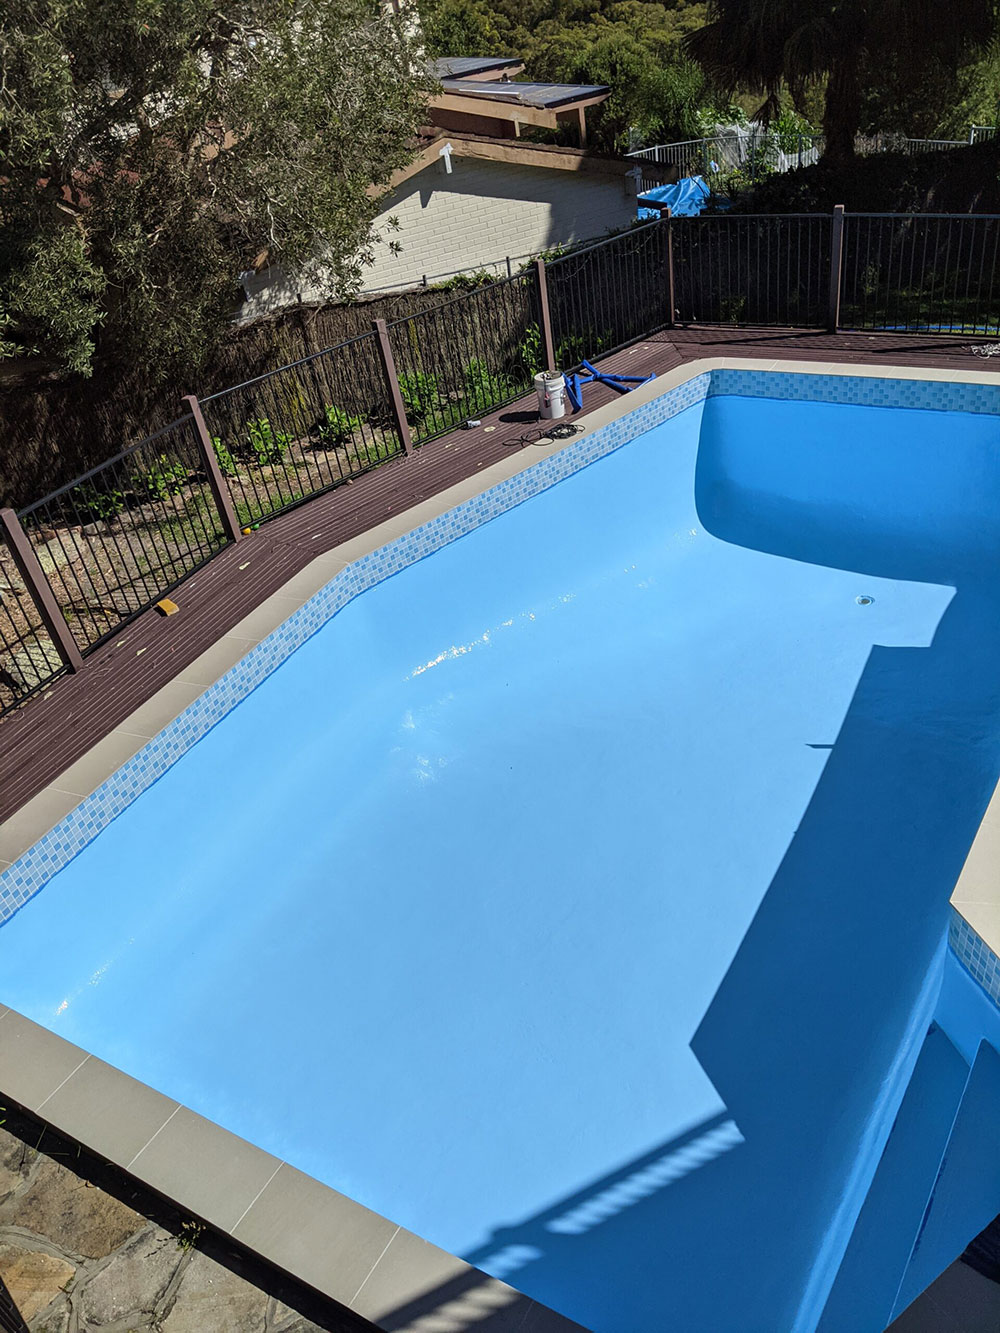 After-the-painting How to paint a swimming pool to make it look good